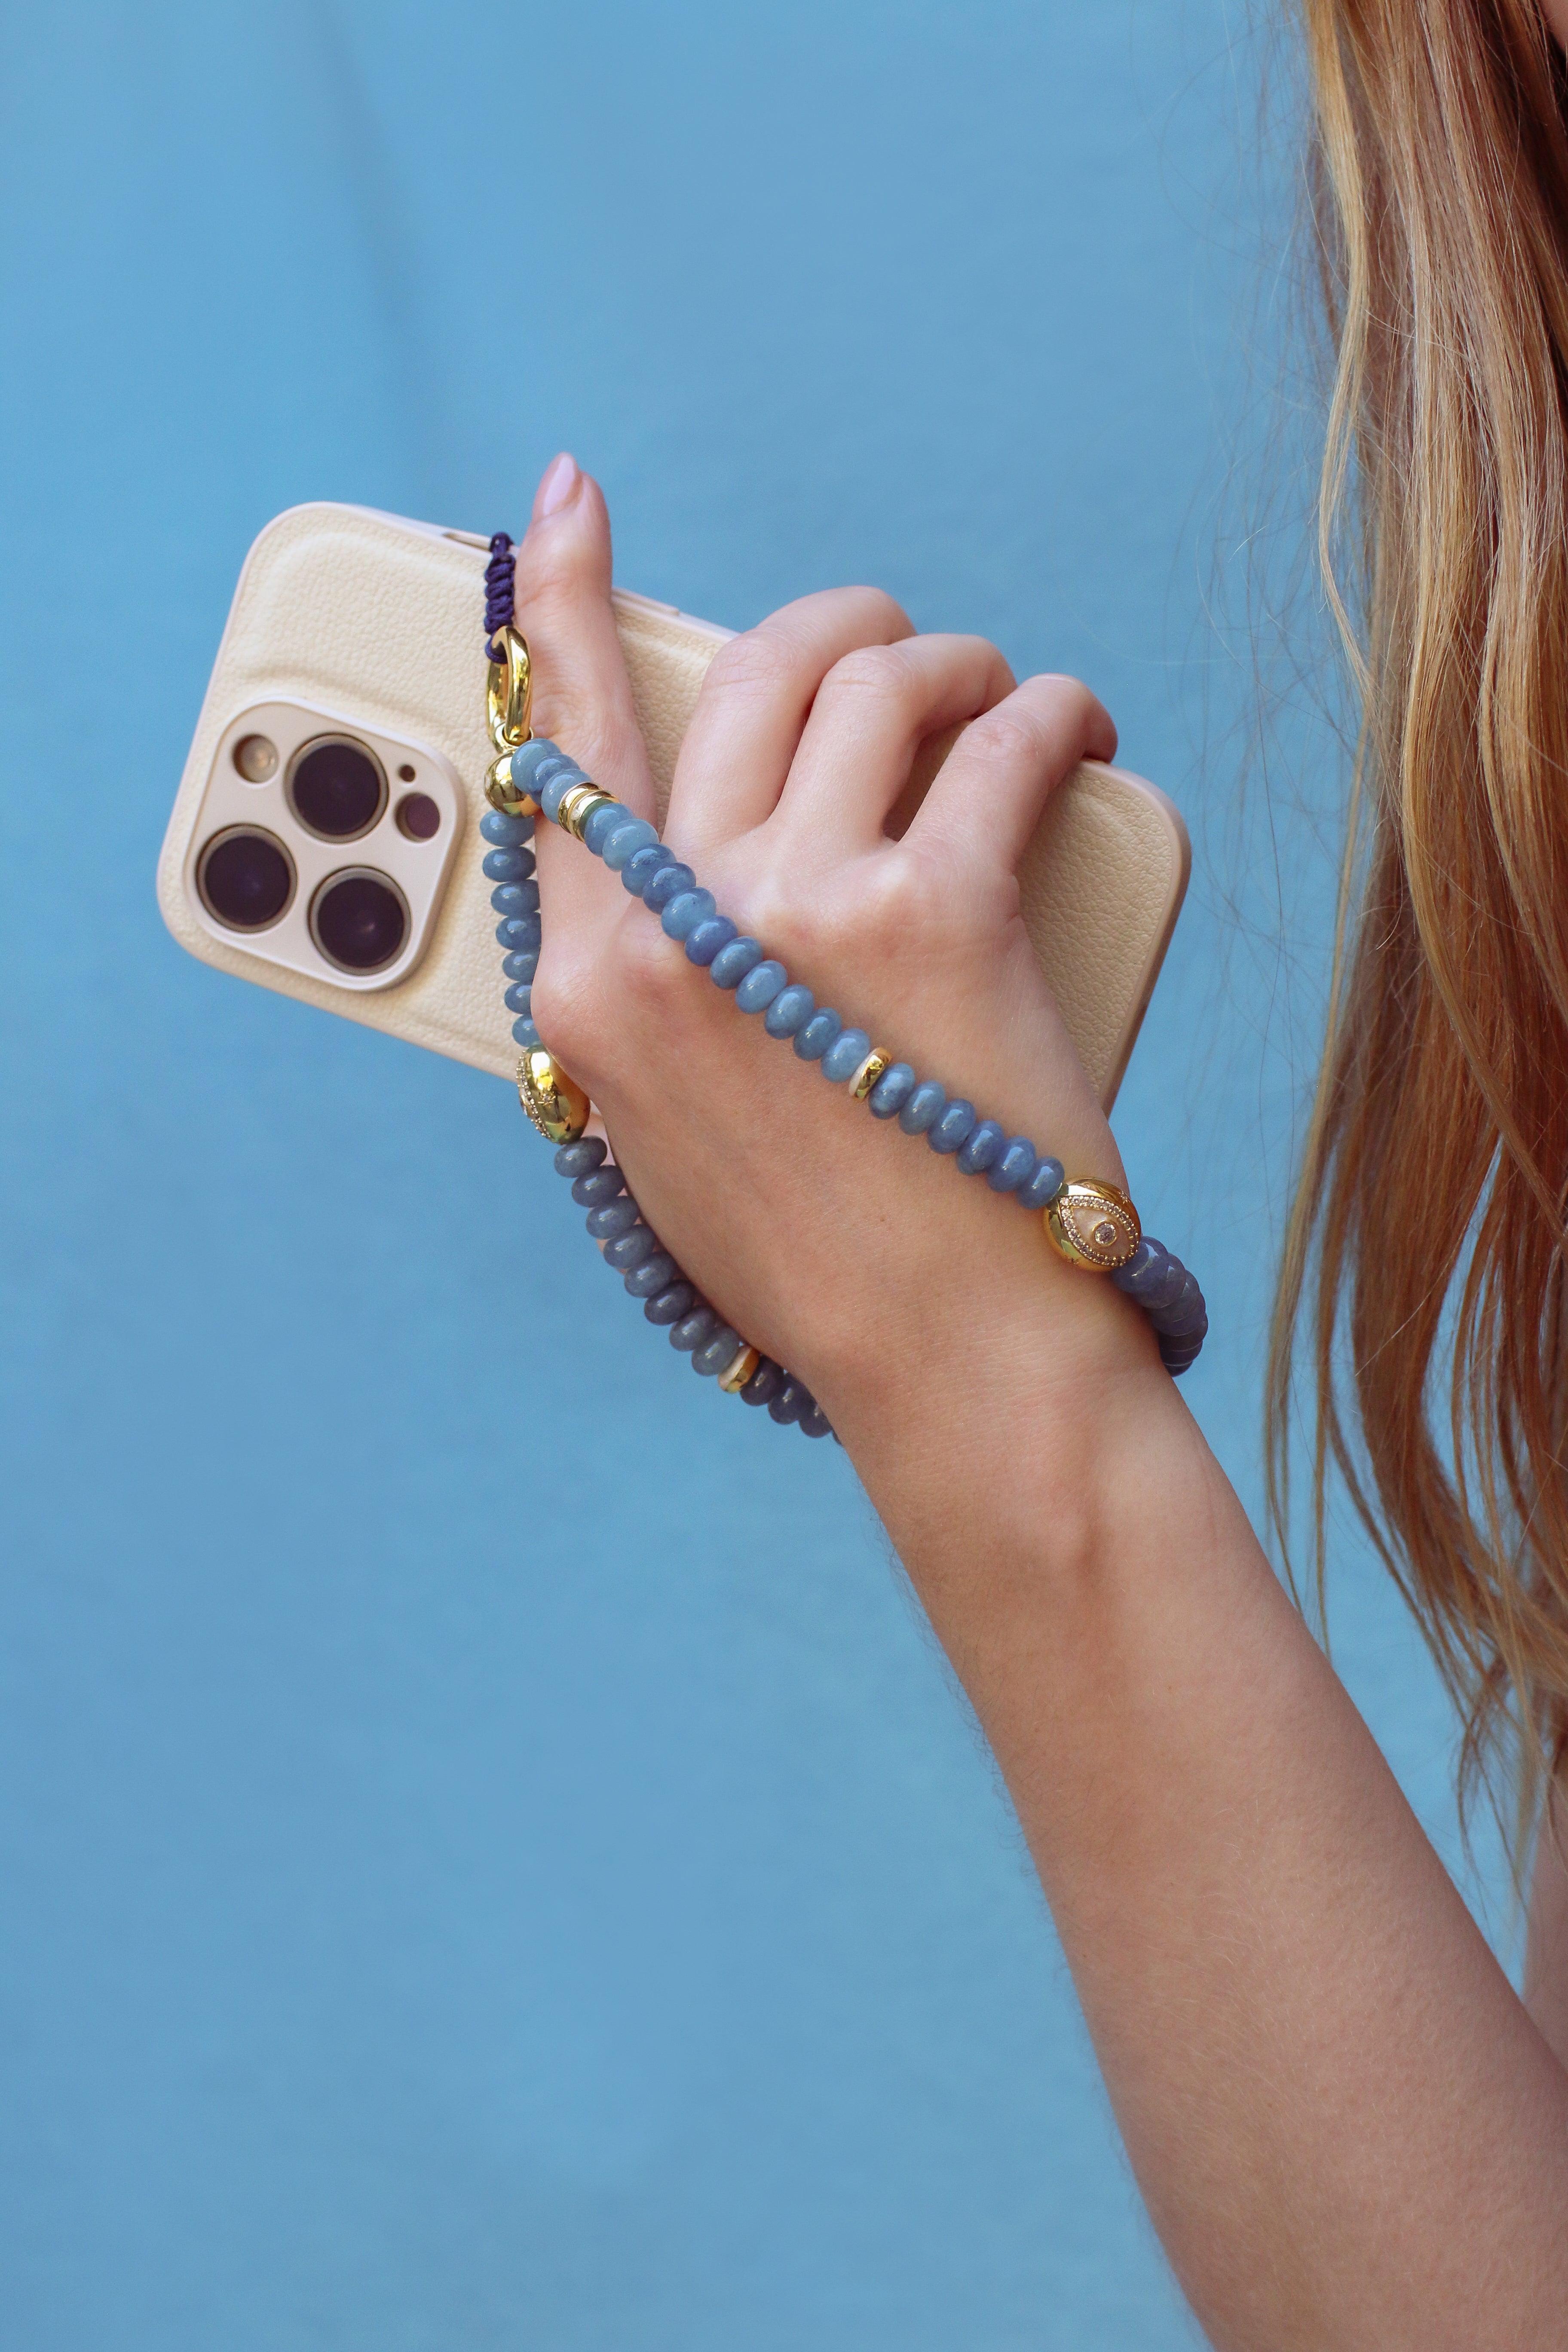 Close-up of a hand holding a white phone, with its blue beaded strap worn around the wrist